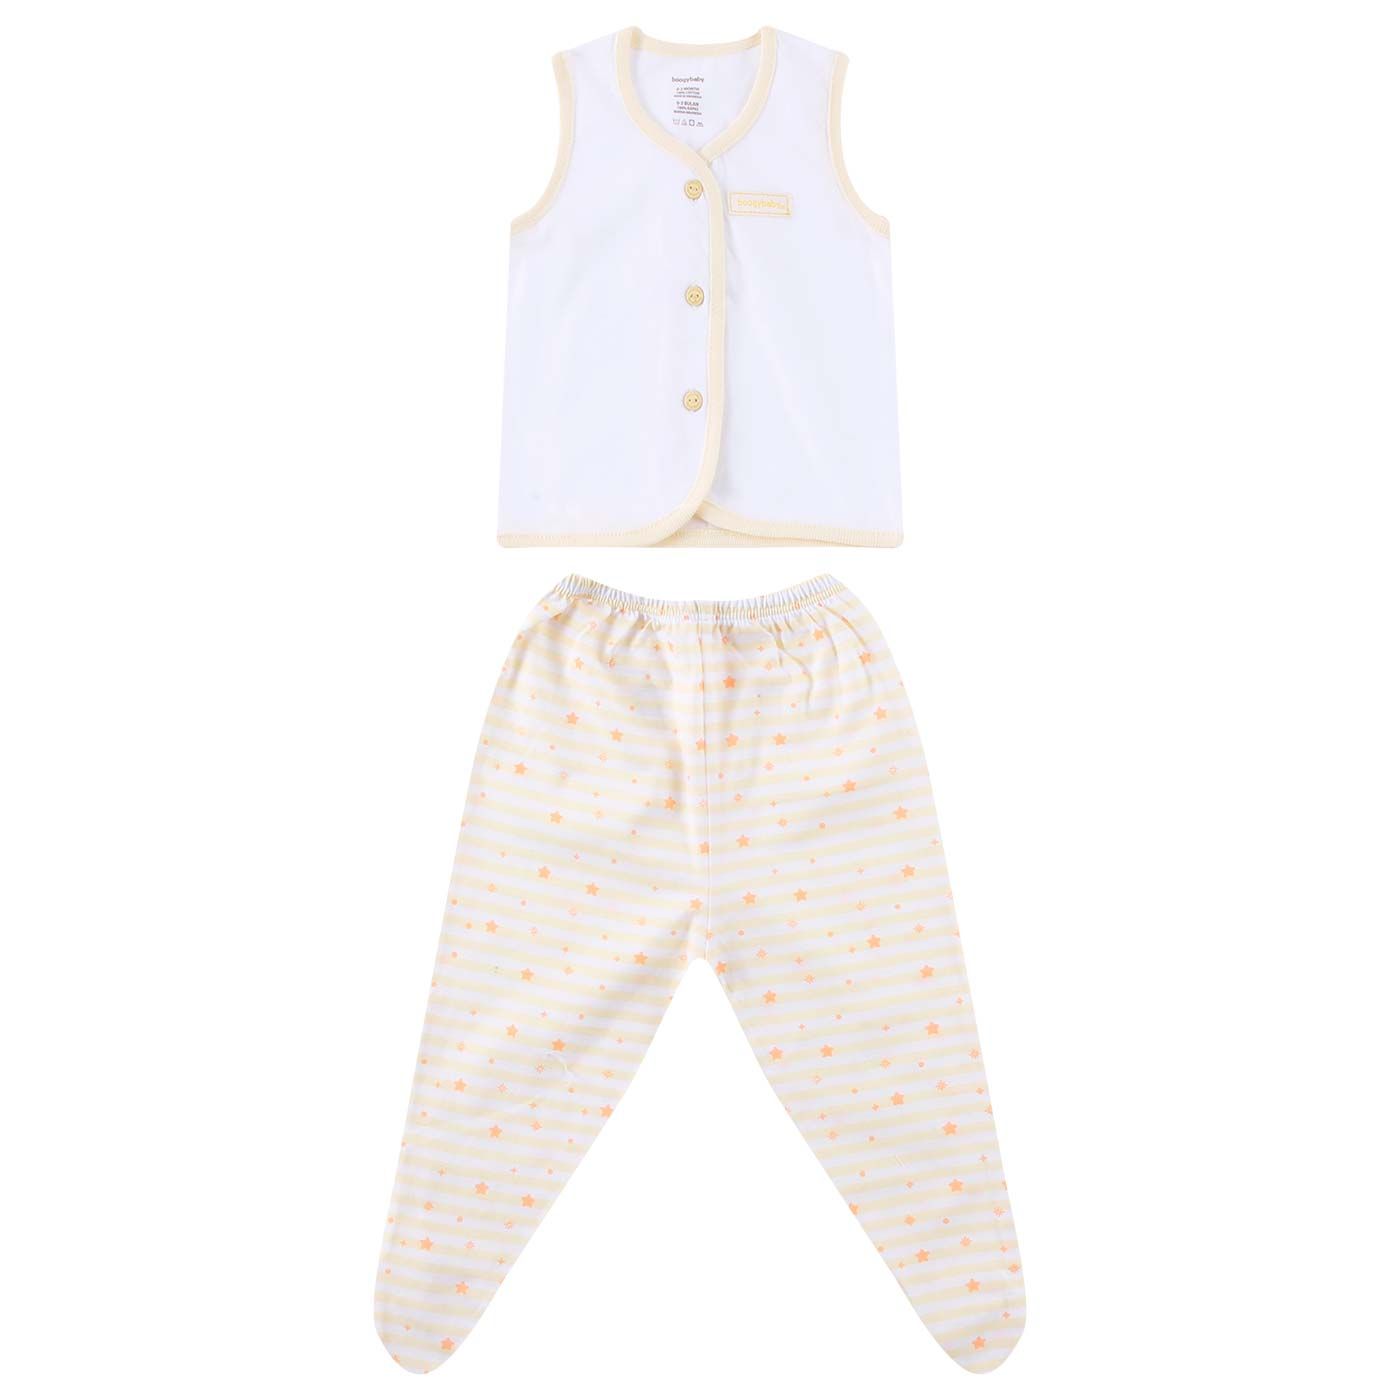 Boogybaby Sleeveless&Closed Trousers Girl-NB Stadust (Isi 3) - 2